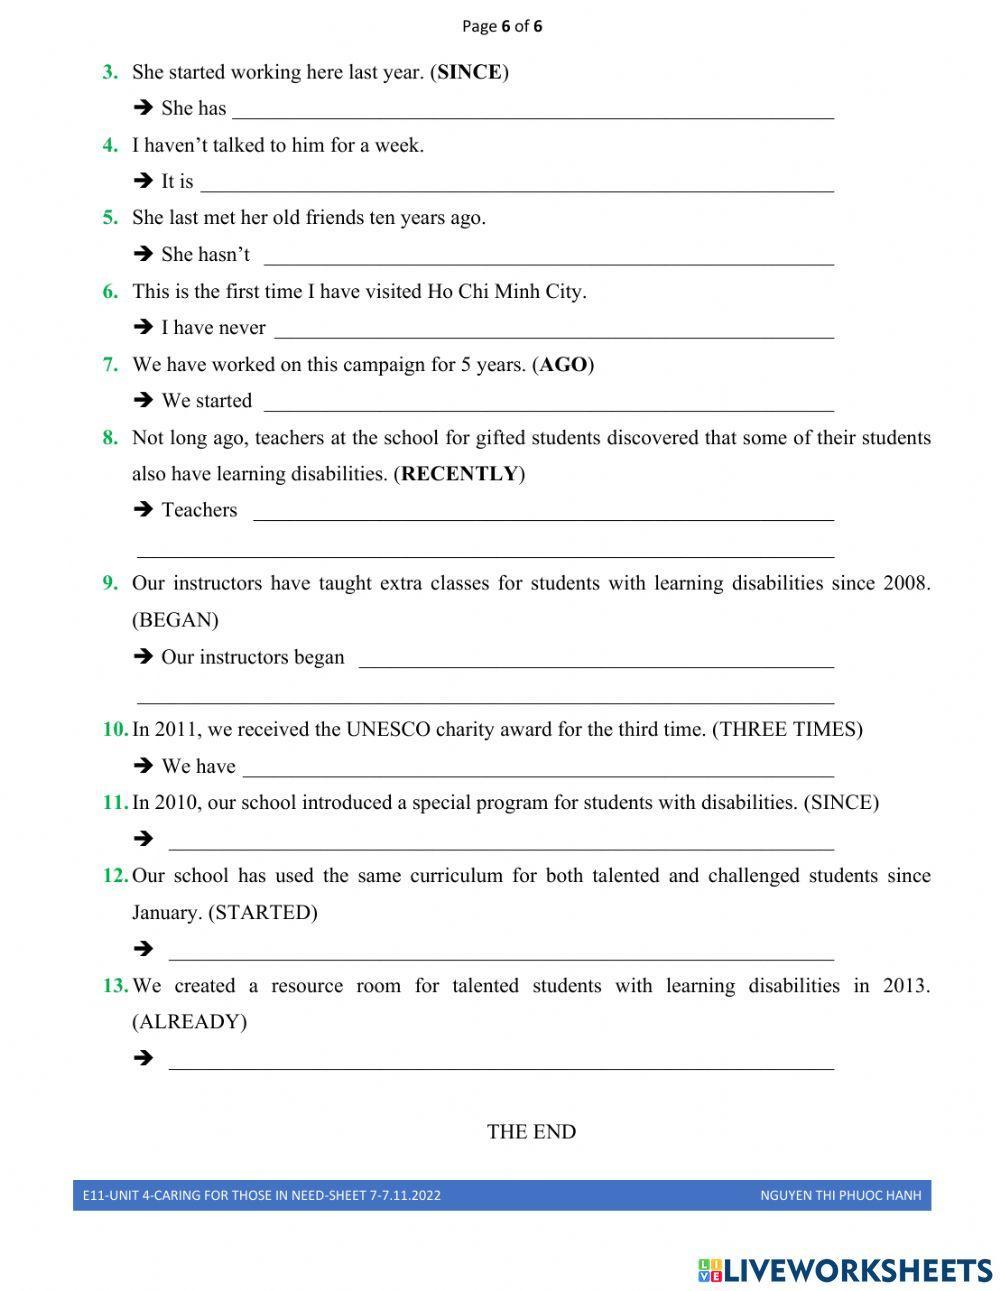 E11-unit 4- caring for those in need-sheet 7